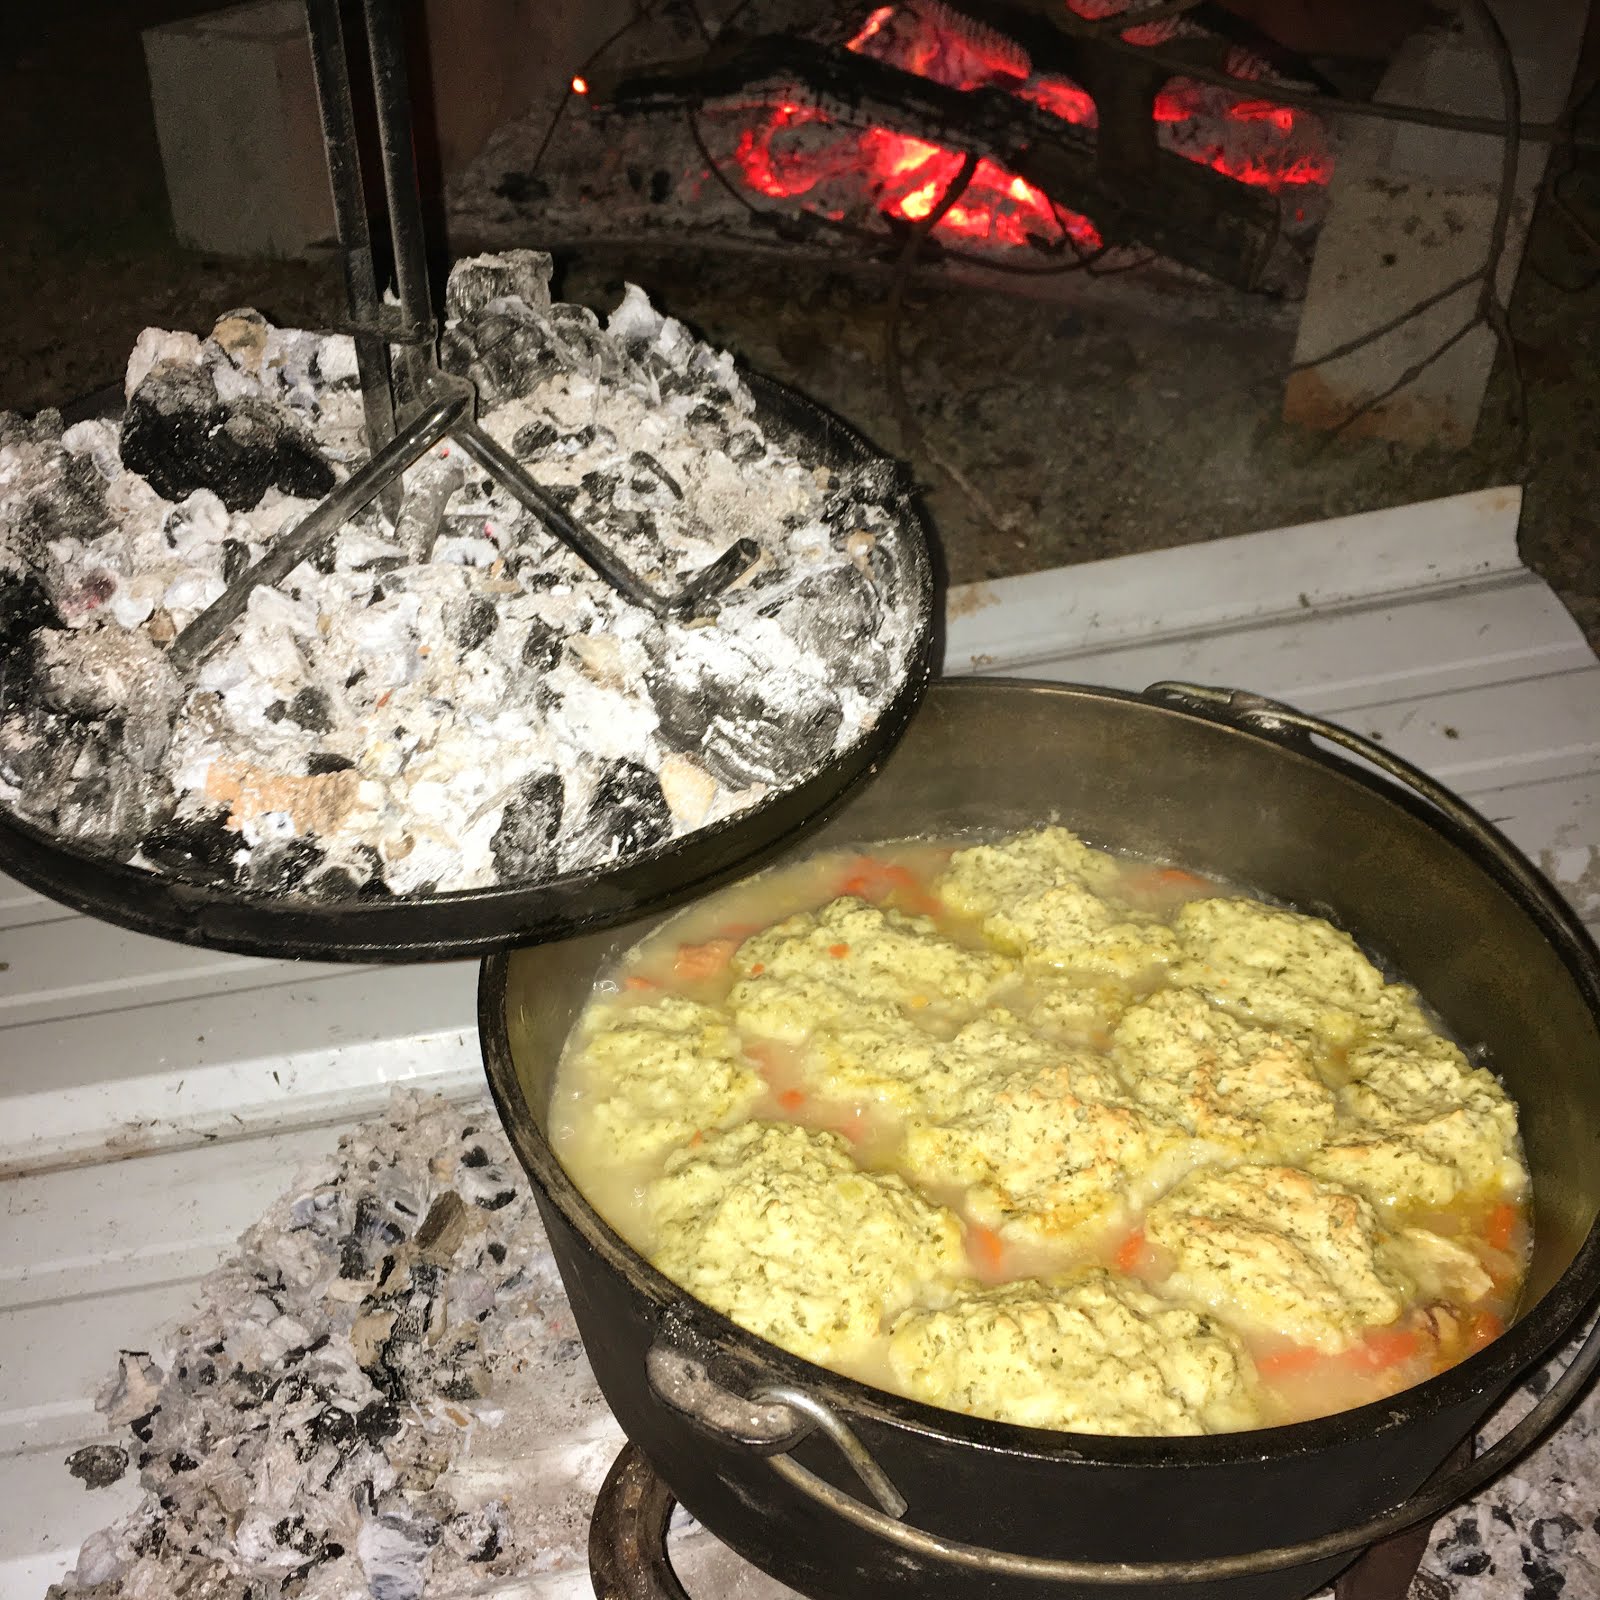 Dutch Oven Cooking Over a Fire